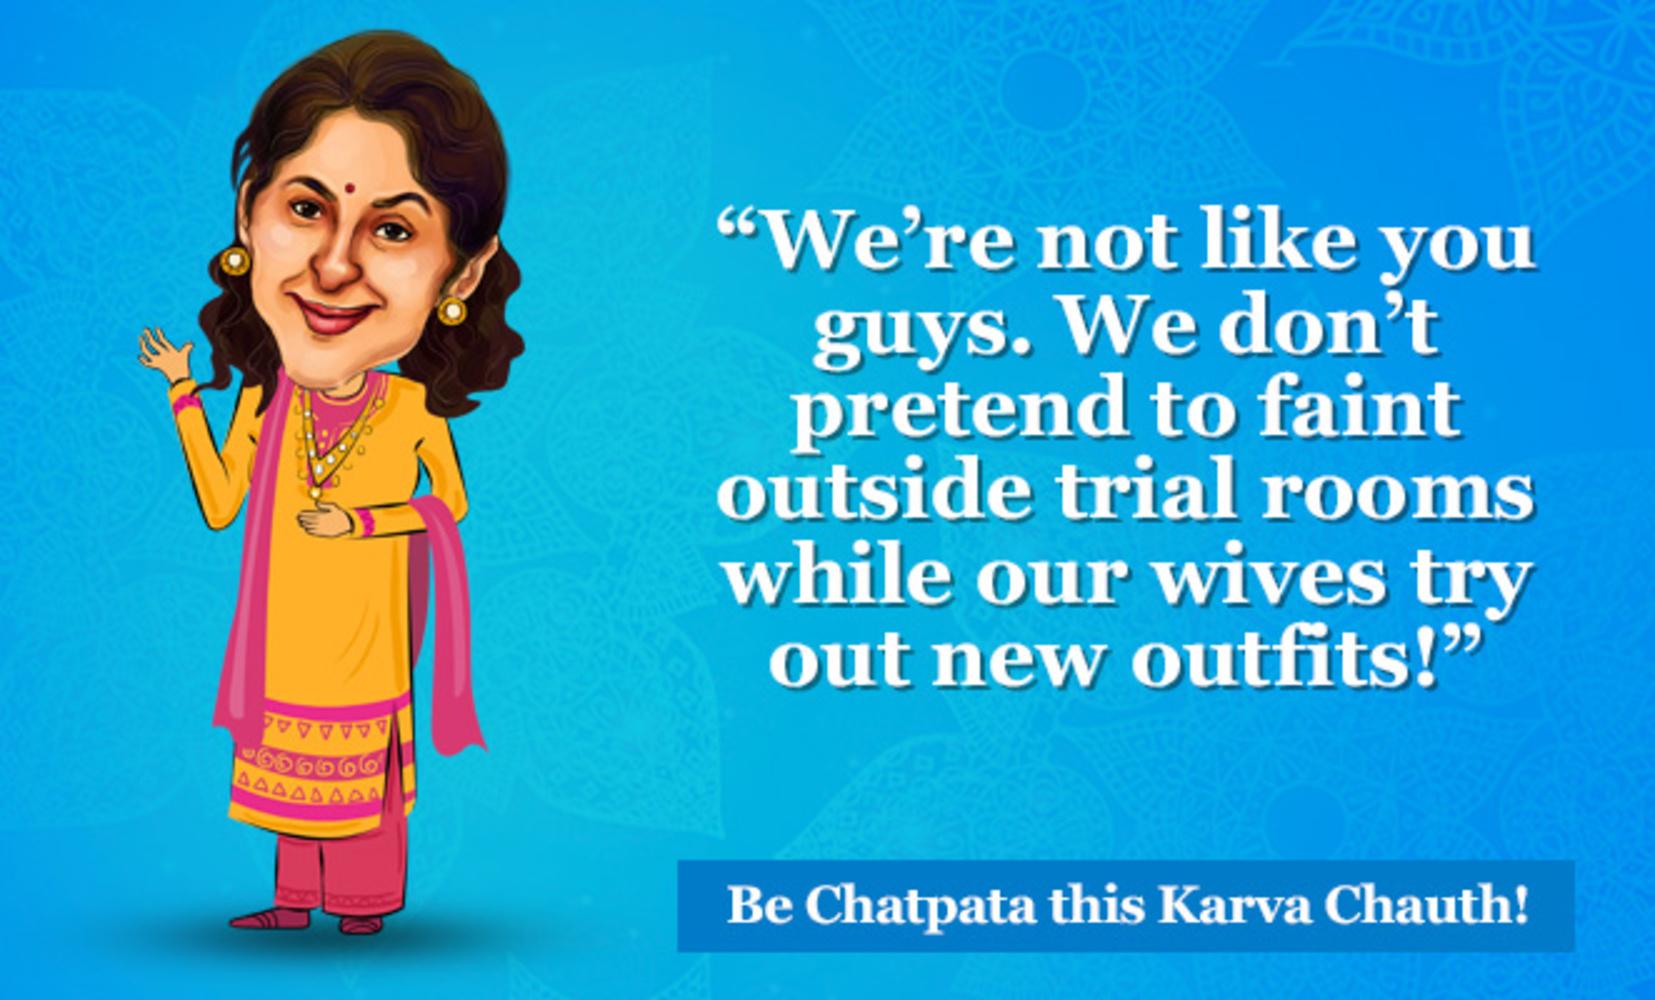 This Is What Your Wife Could Be Really Thinking This Karva Chauth